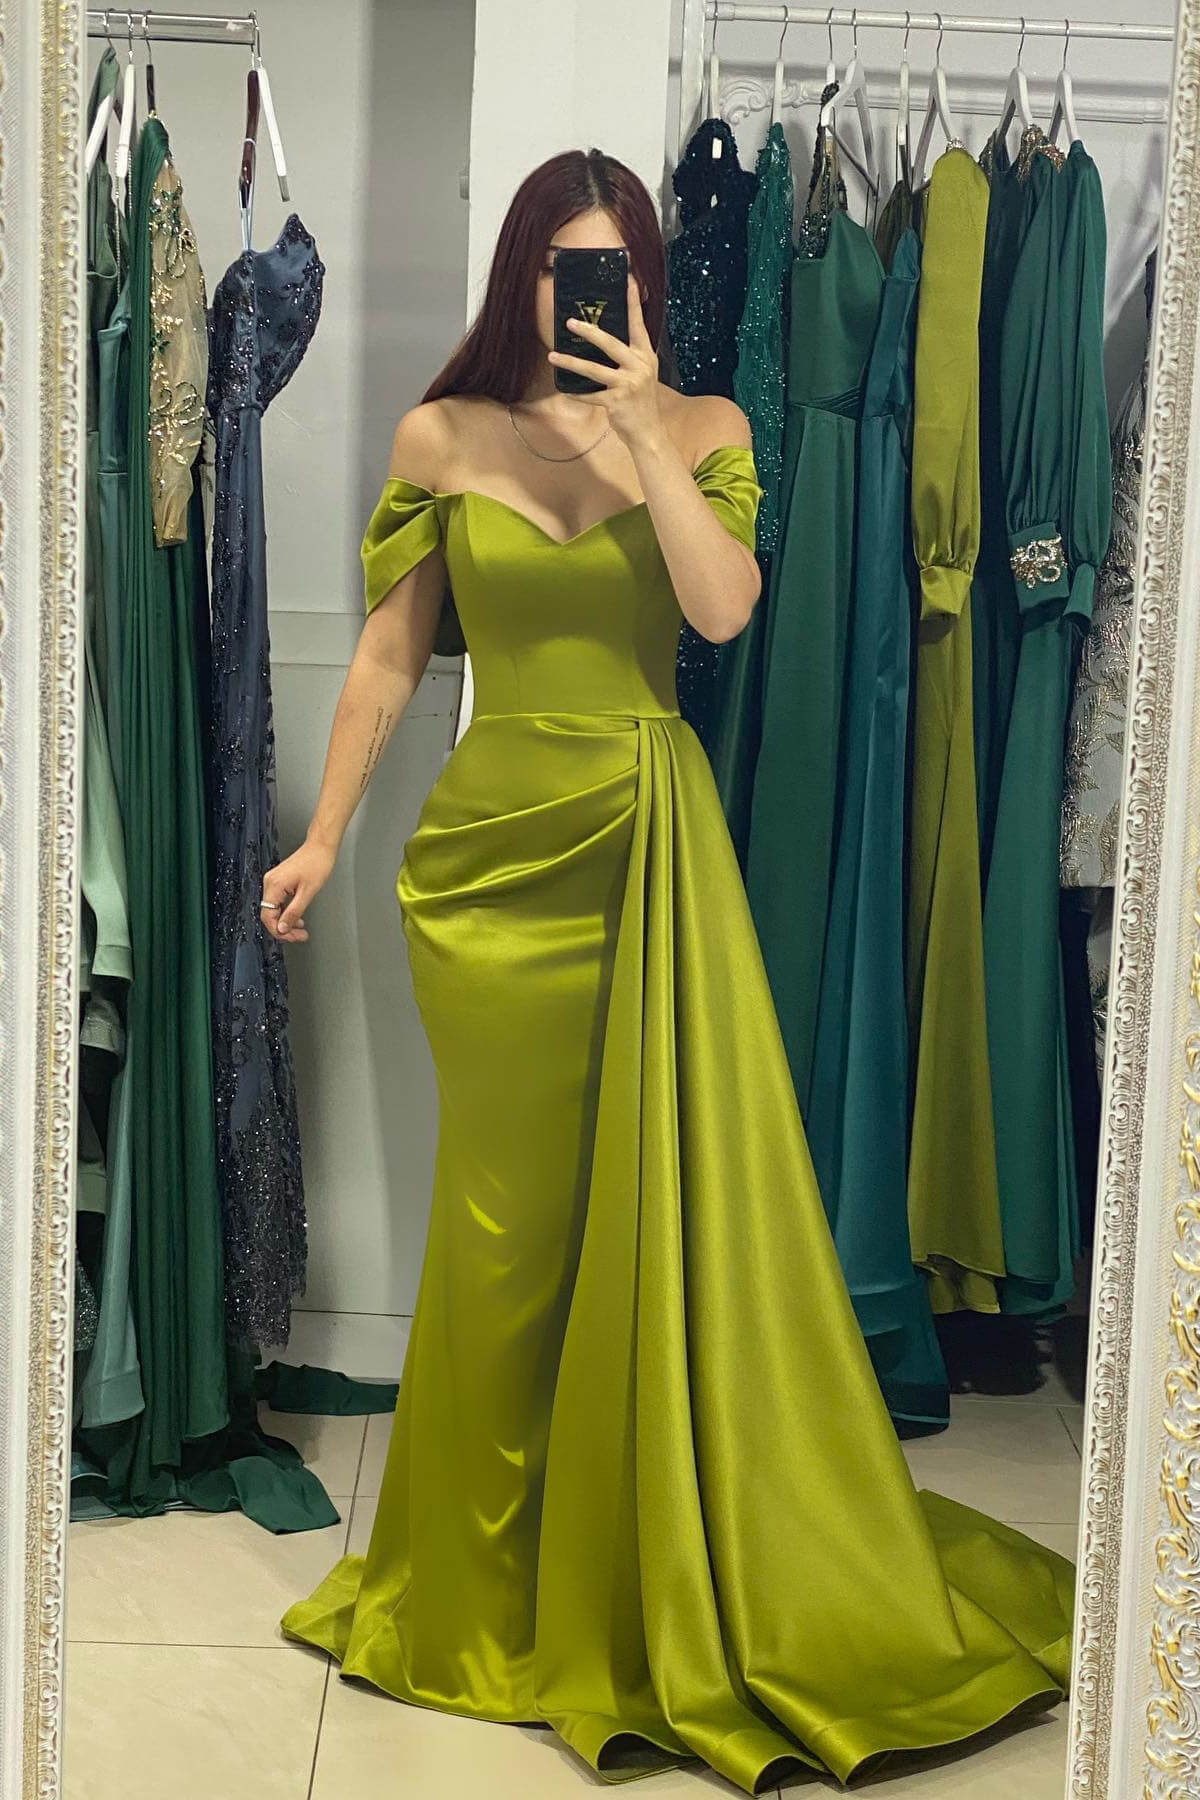 Chic Green Off-the-Shoulder Sweetheart Mermaid Evening Gown With Ruffles Online - lulusllly